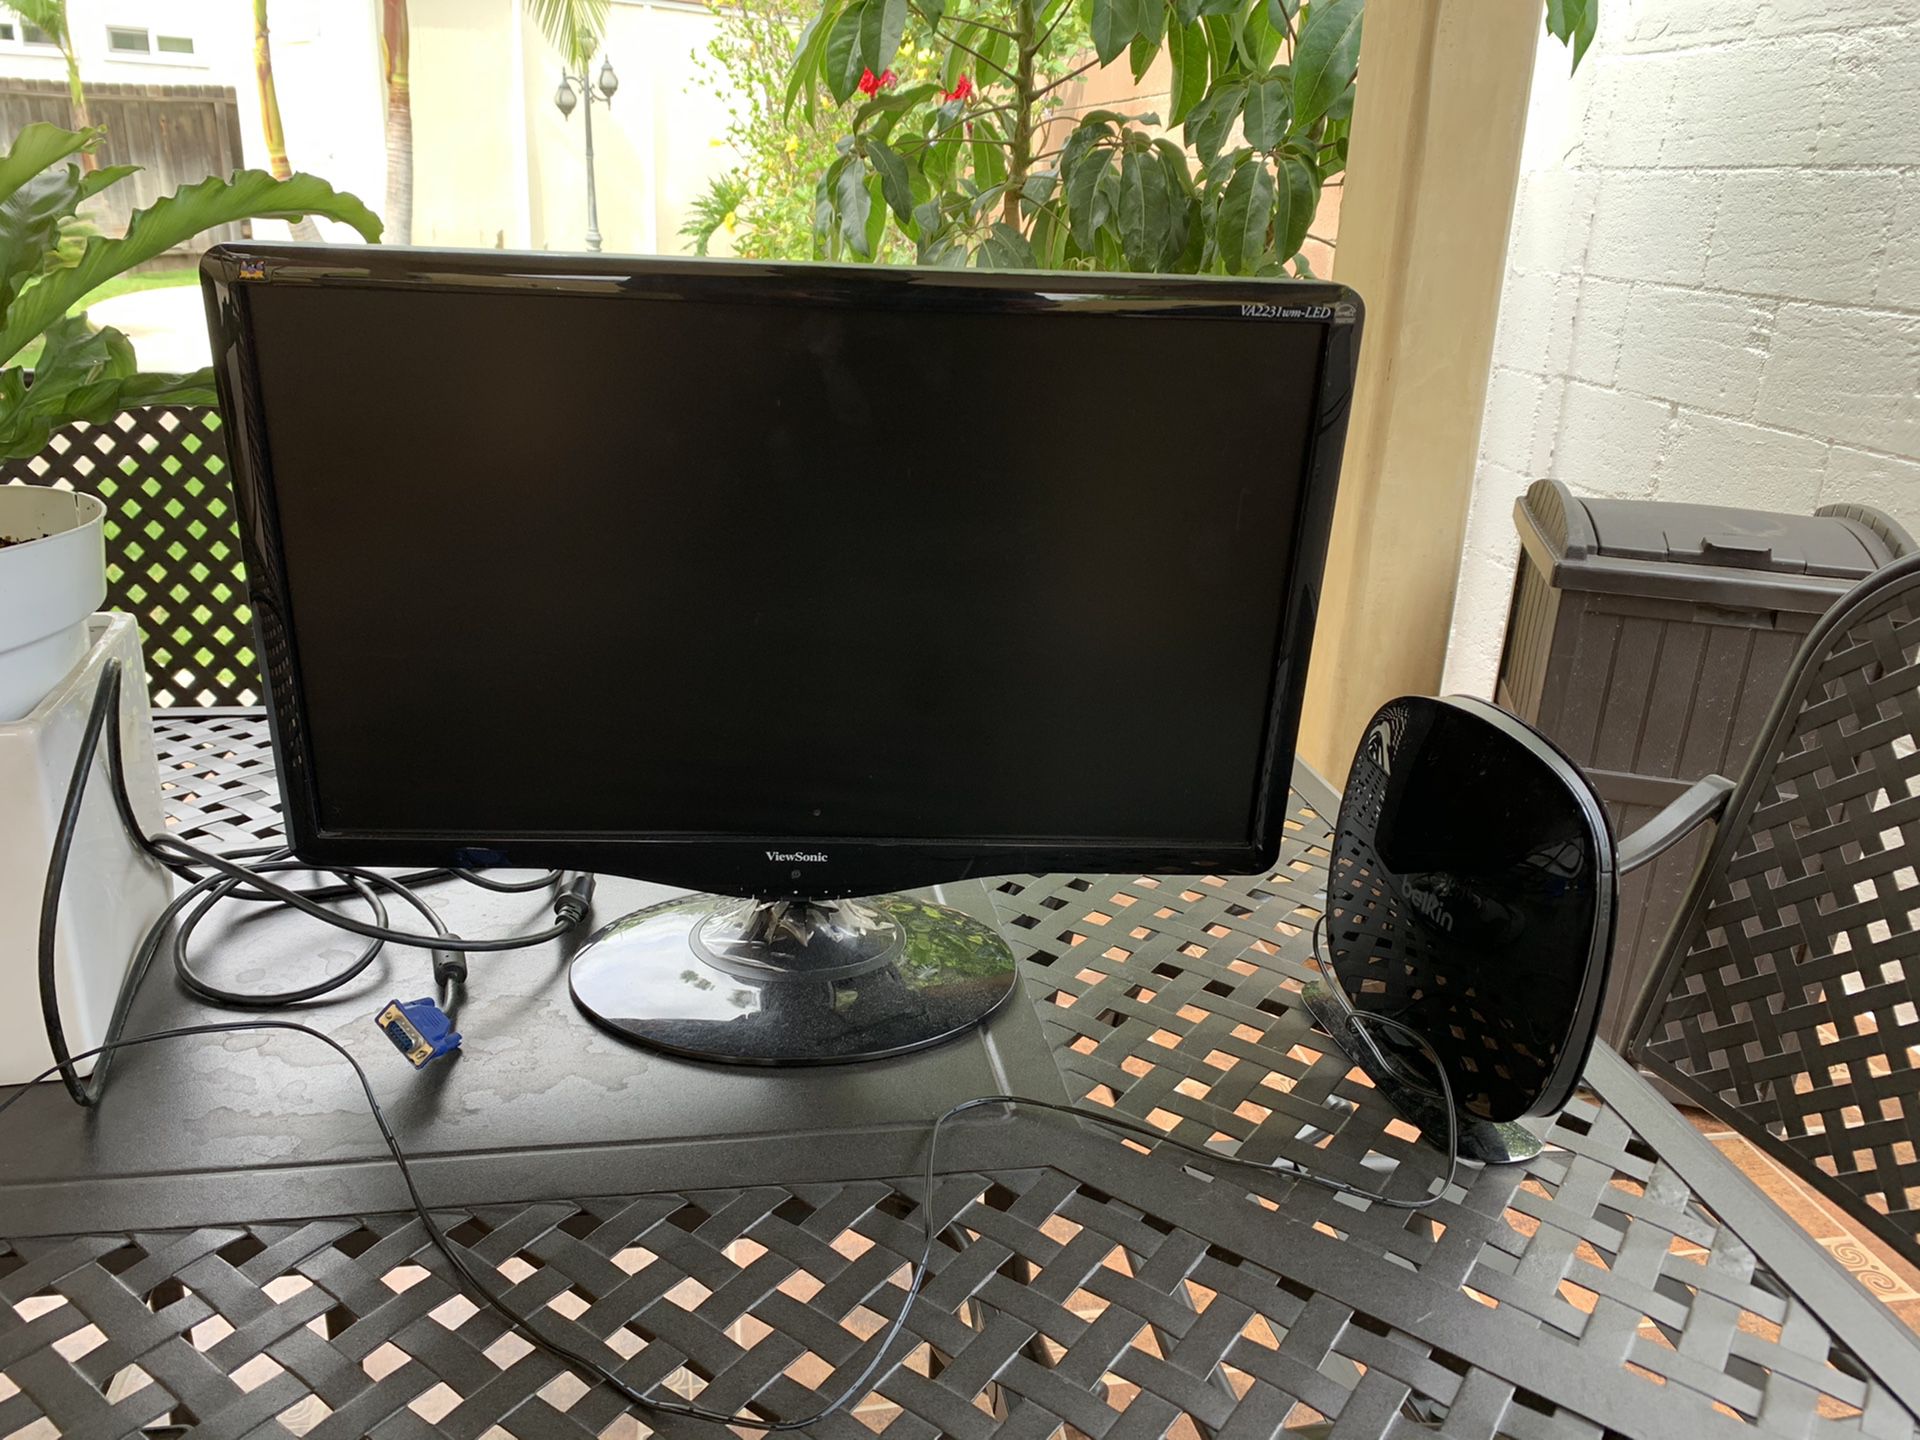 ViewSonic 15” LED Computer Screen and Belkin WIFI Signal Extender, in Excellent Condition!